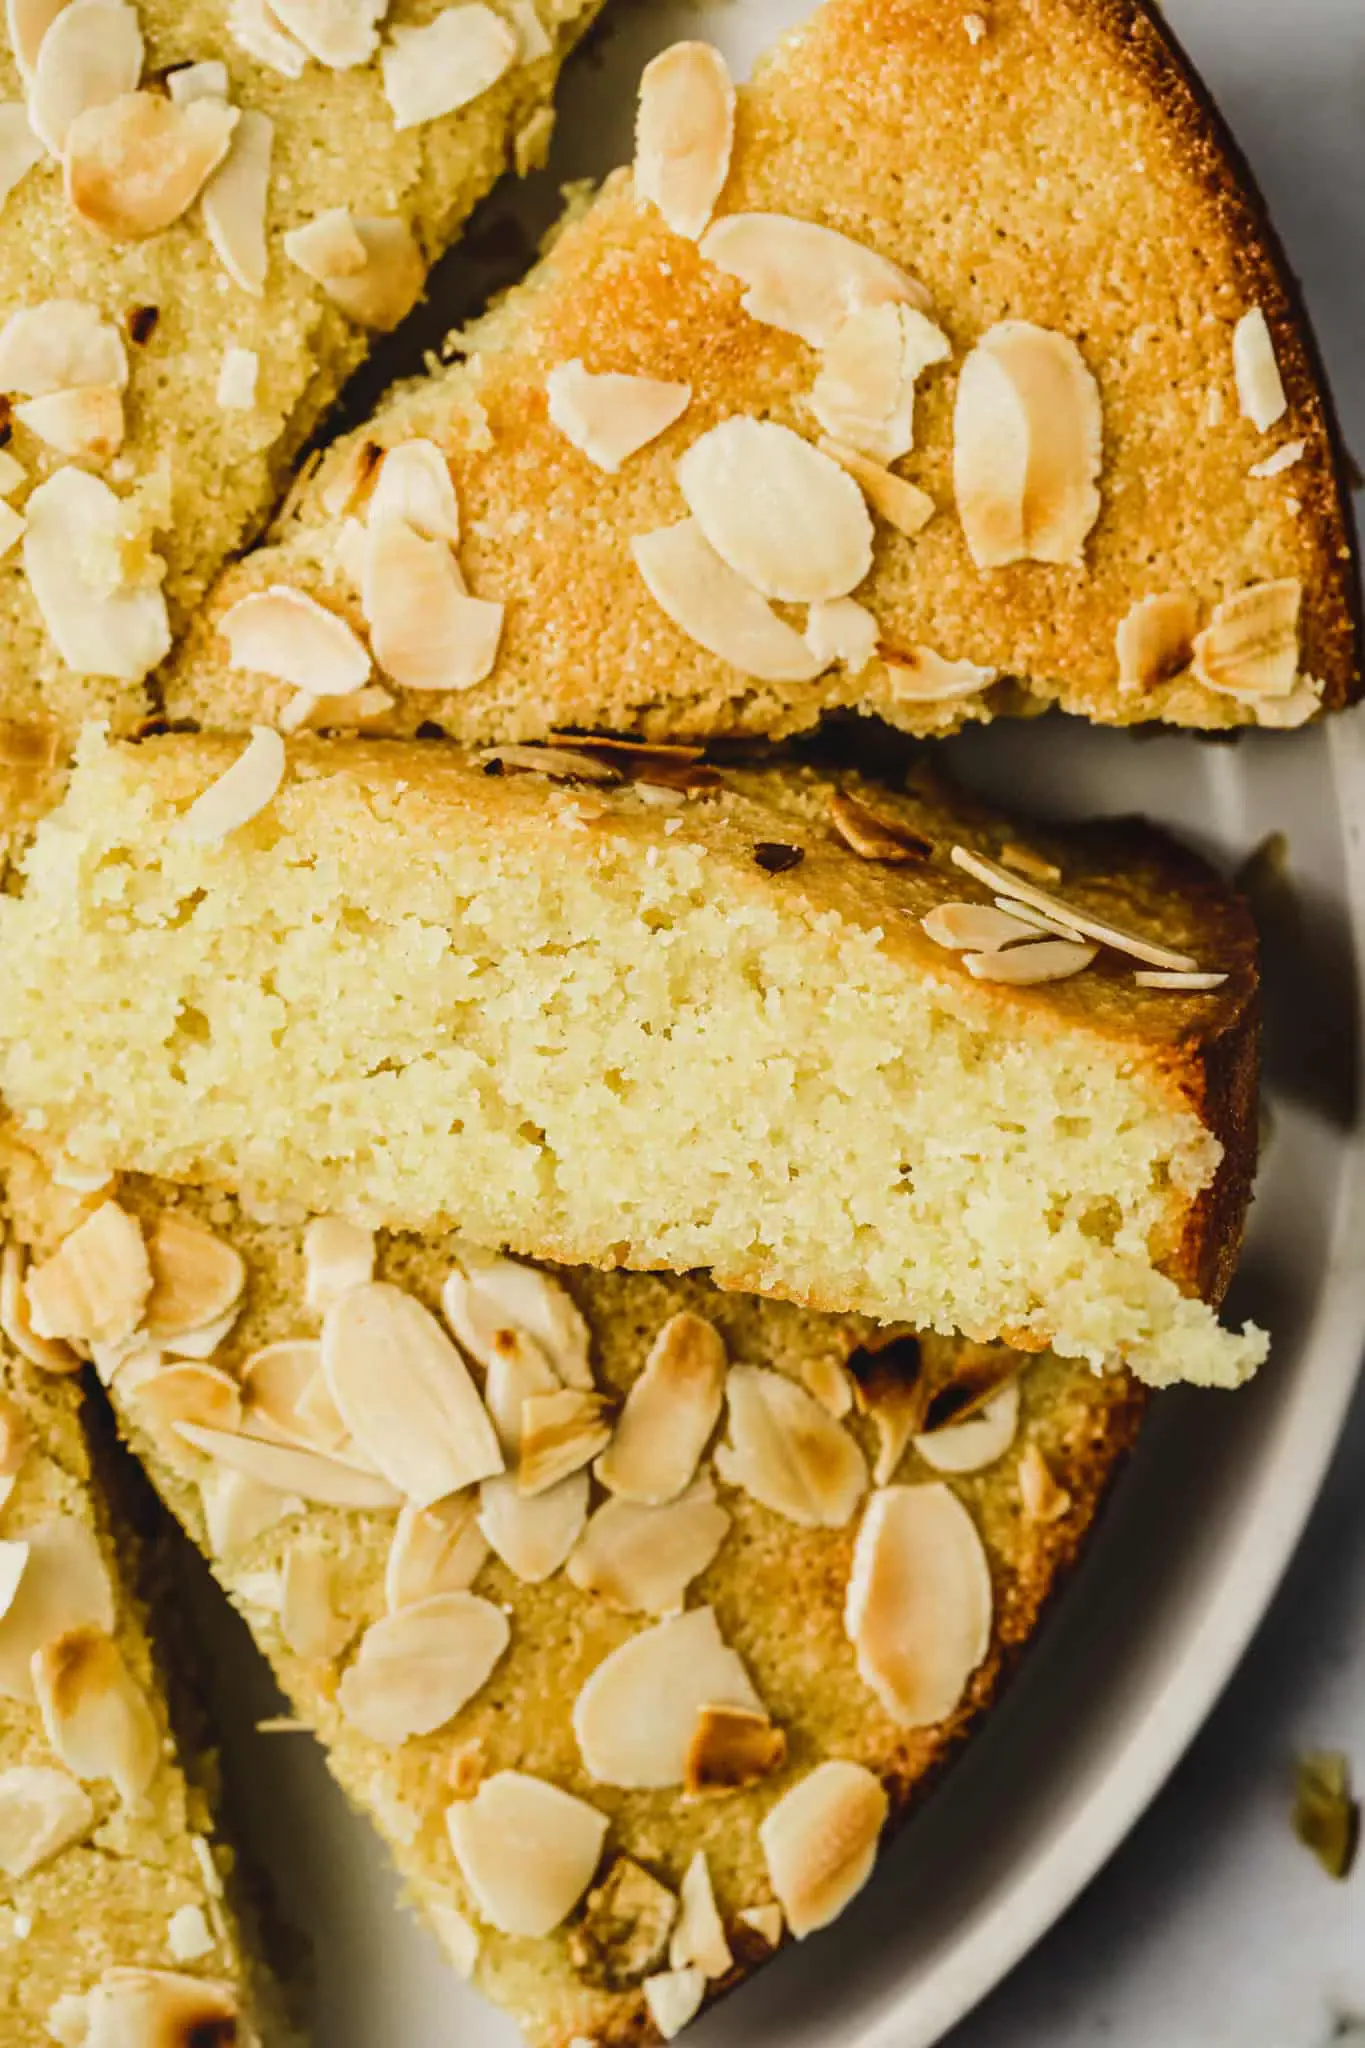 Almond cake cut in slices on a plate